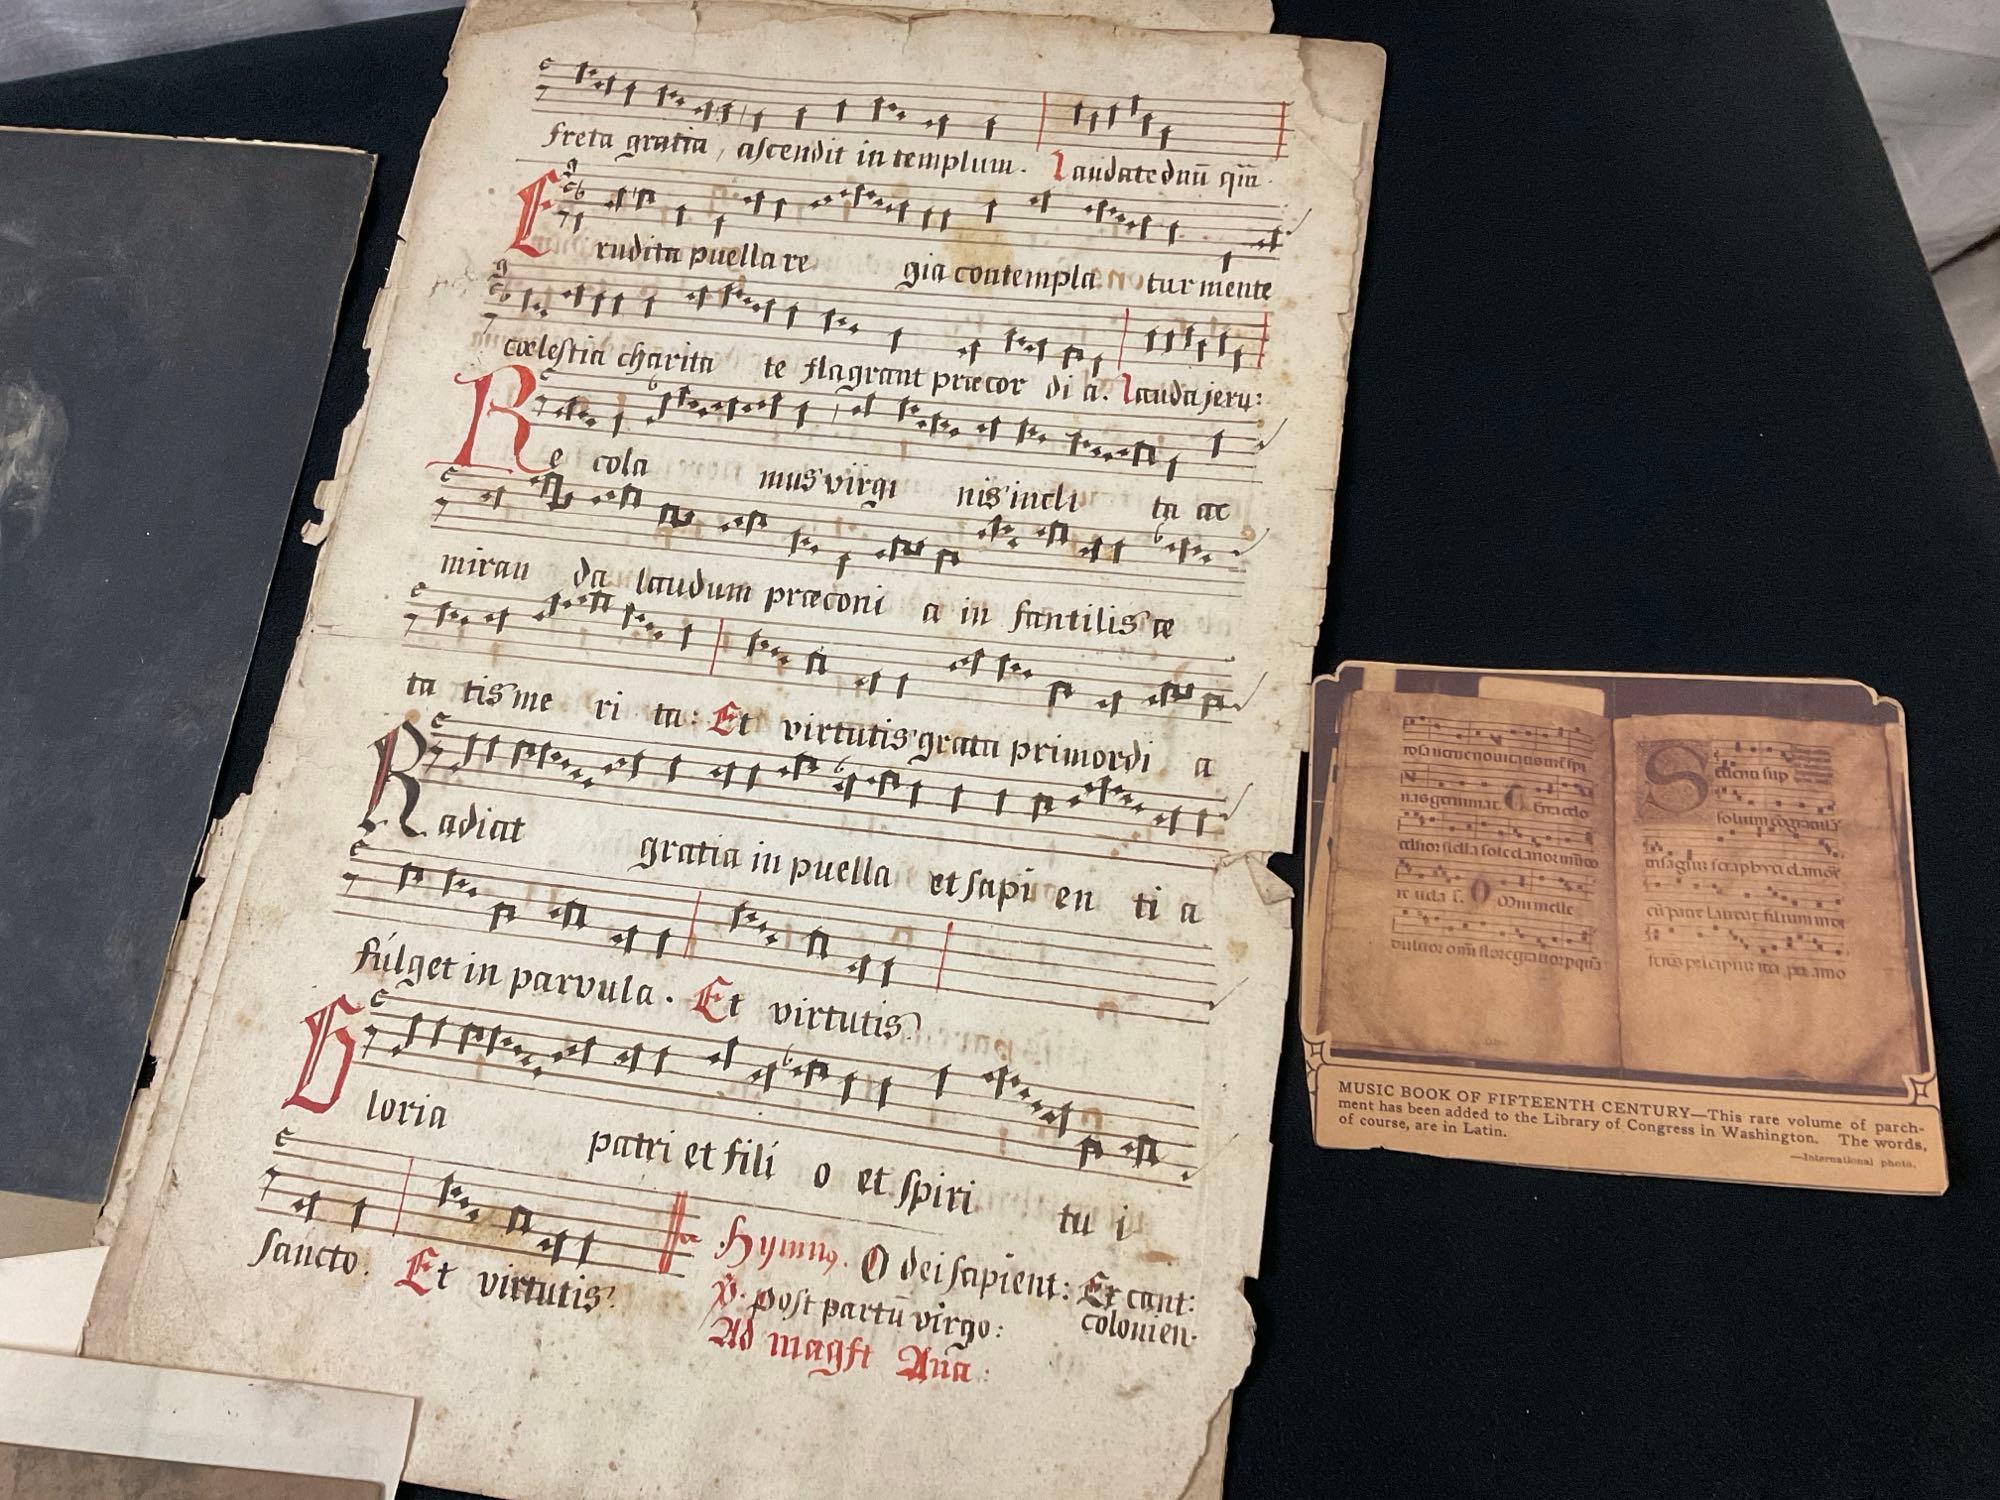 Assorted Musical epherama, Portrait Prints of Musicians, 15th (?) Century Latin Hymn Pages